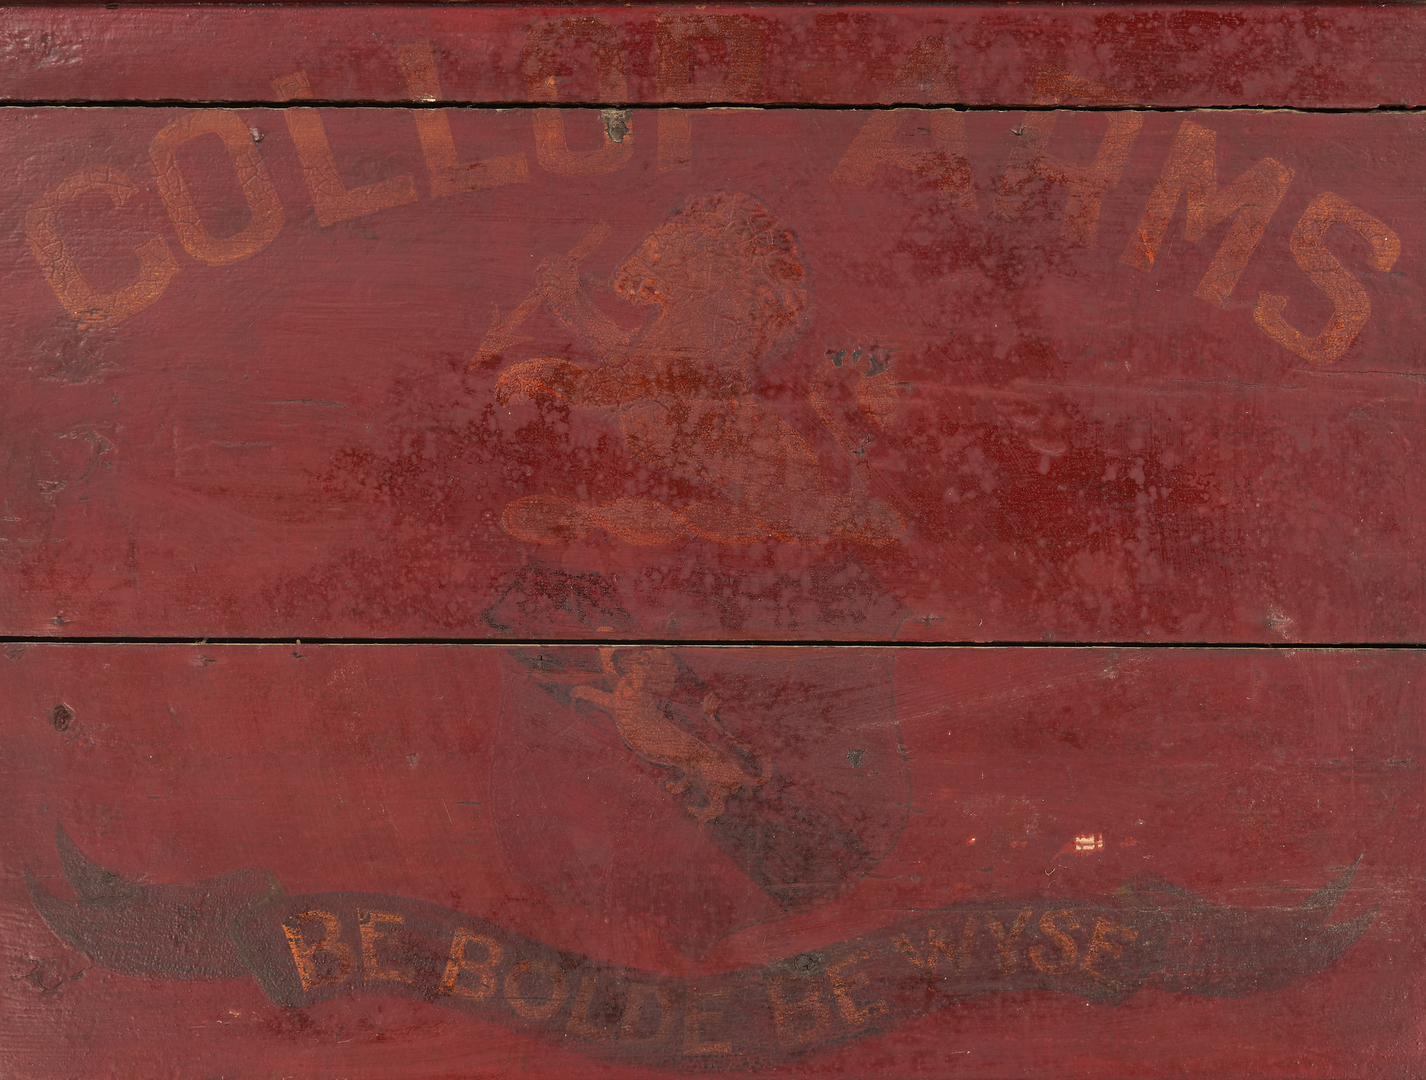 Lot 1173: English Painted Pub Sign, Gollop Arms